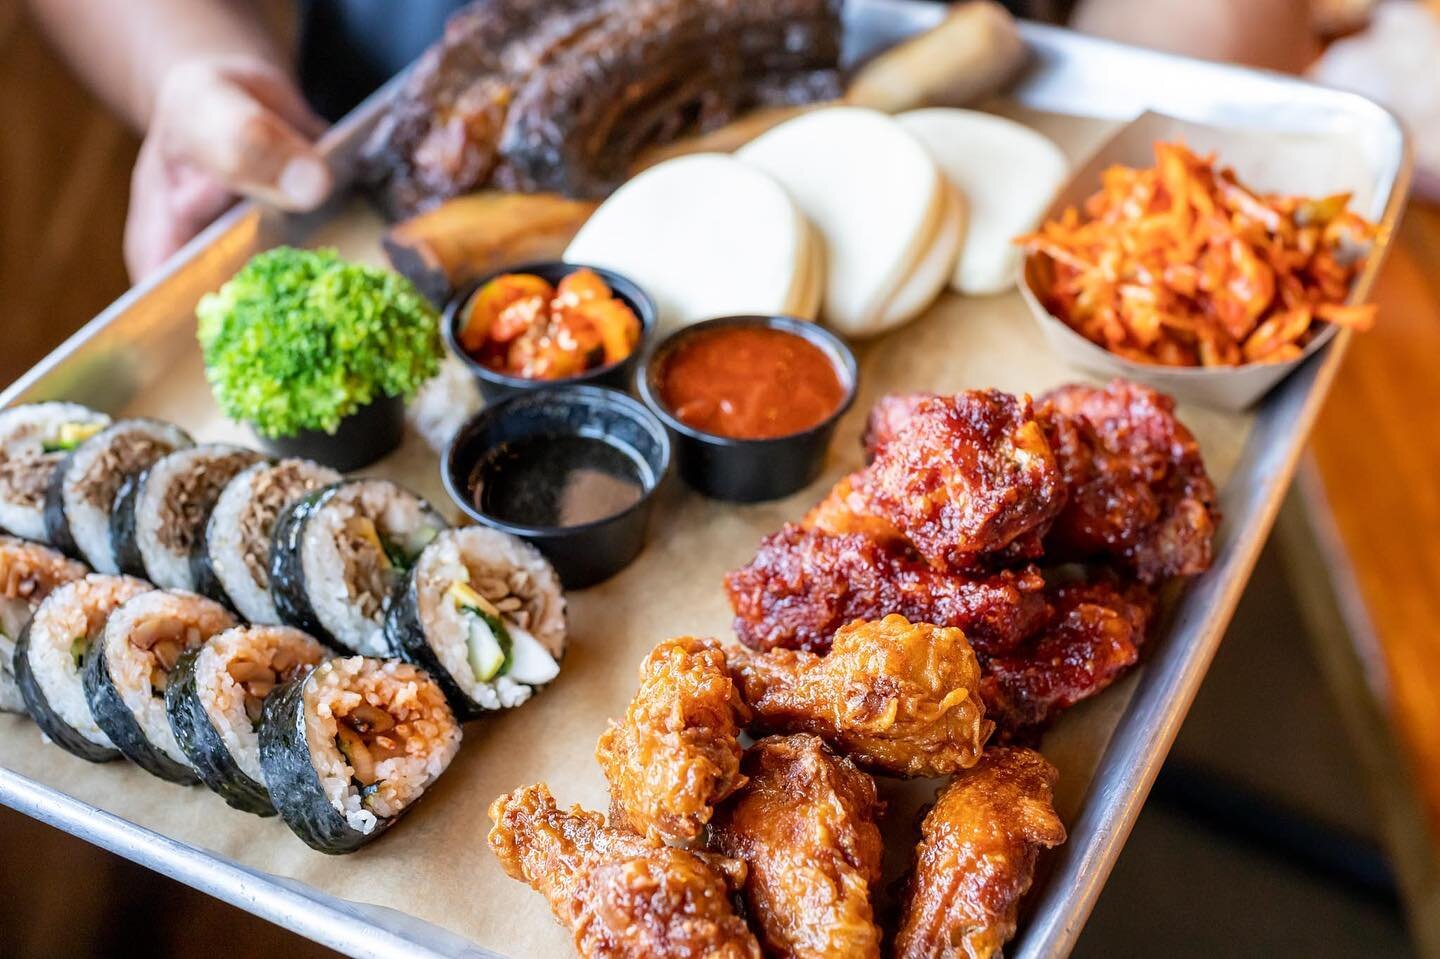 And this is @seoulfoodmeatco in Feast mode. 😎🙌🏼😋 Our Southern BBQ with Korean flavors menu items are shareable! Or keep it all for yourself. We don&rsquo;t judge. 
.
#seoulfoodmeatco #seoulfoodmeatcompany #southendclt #milldistrictclt #nodaclt #v